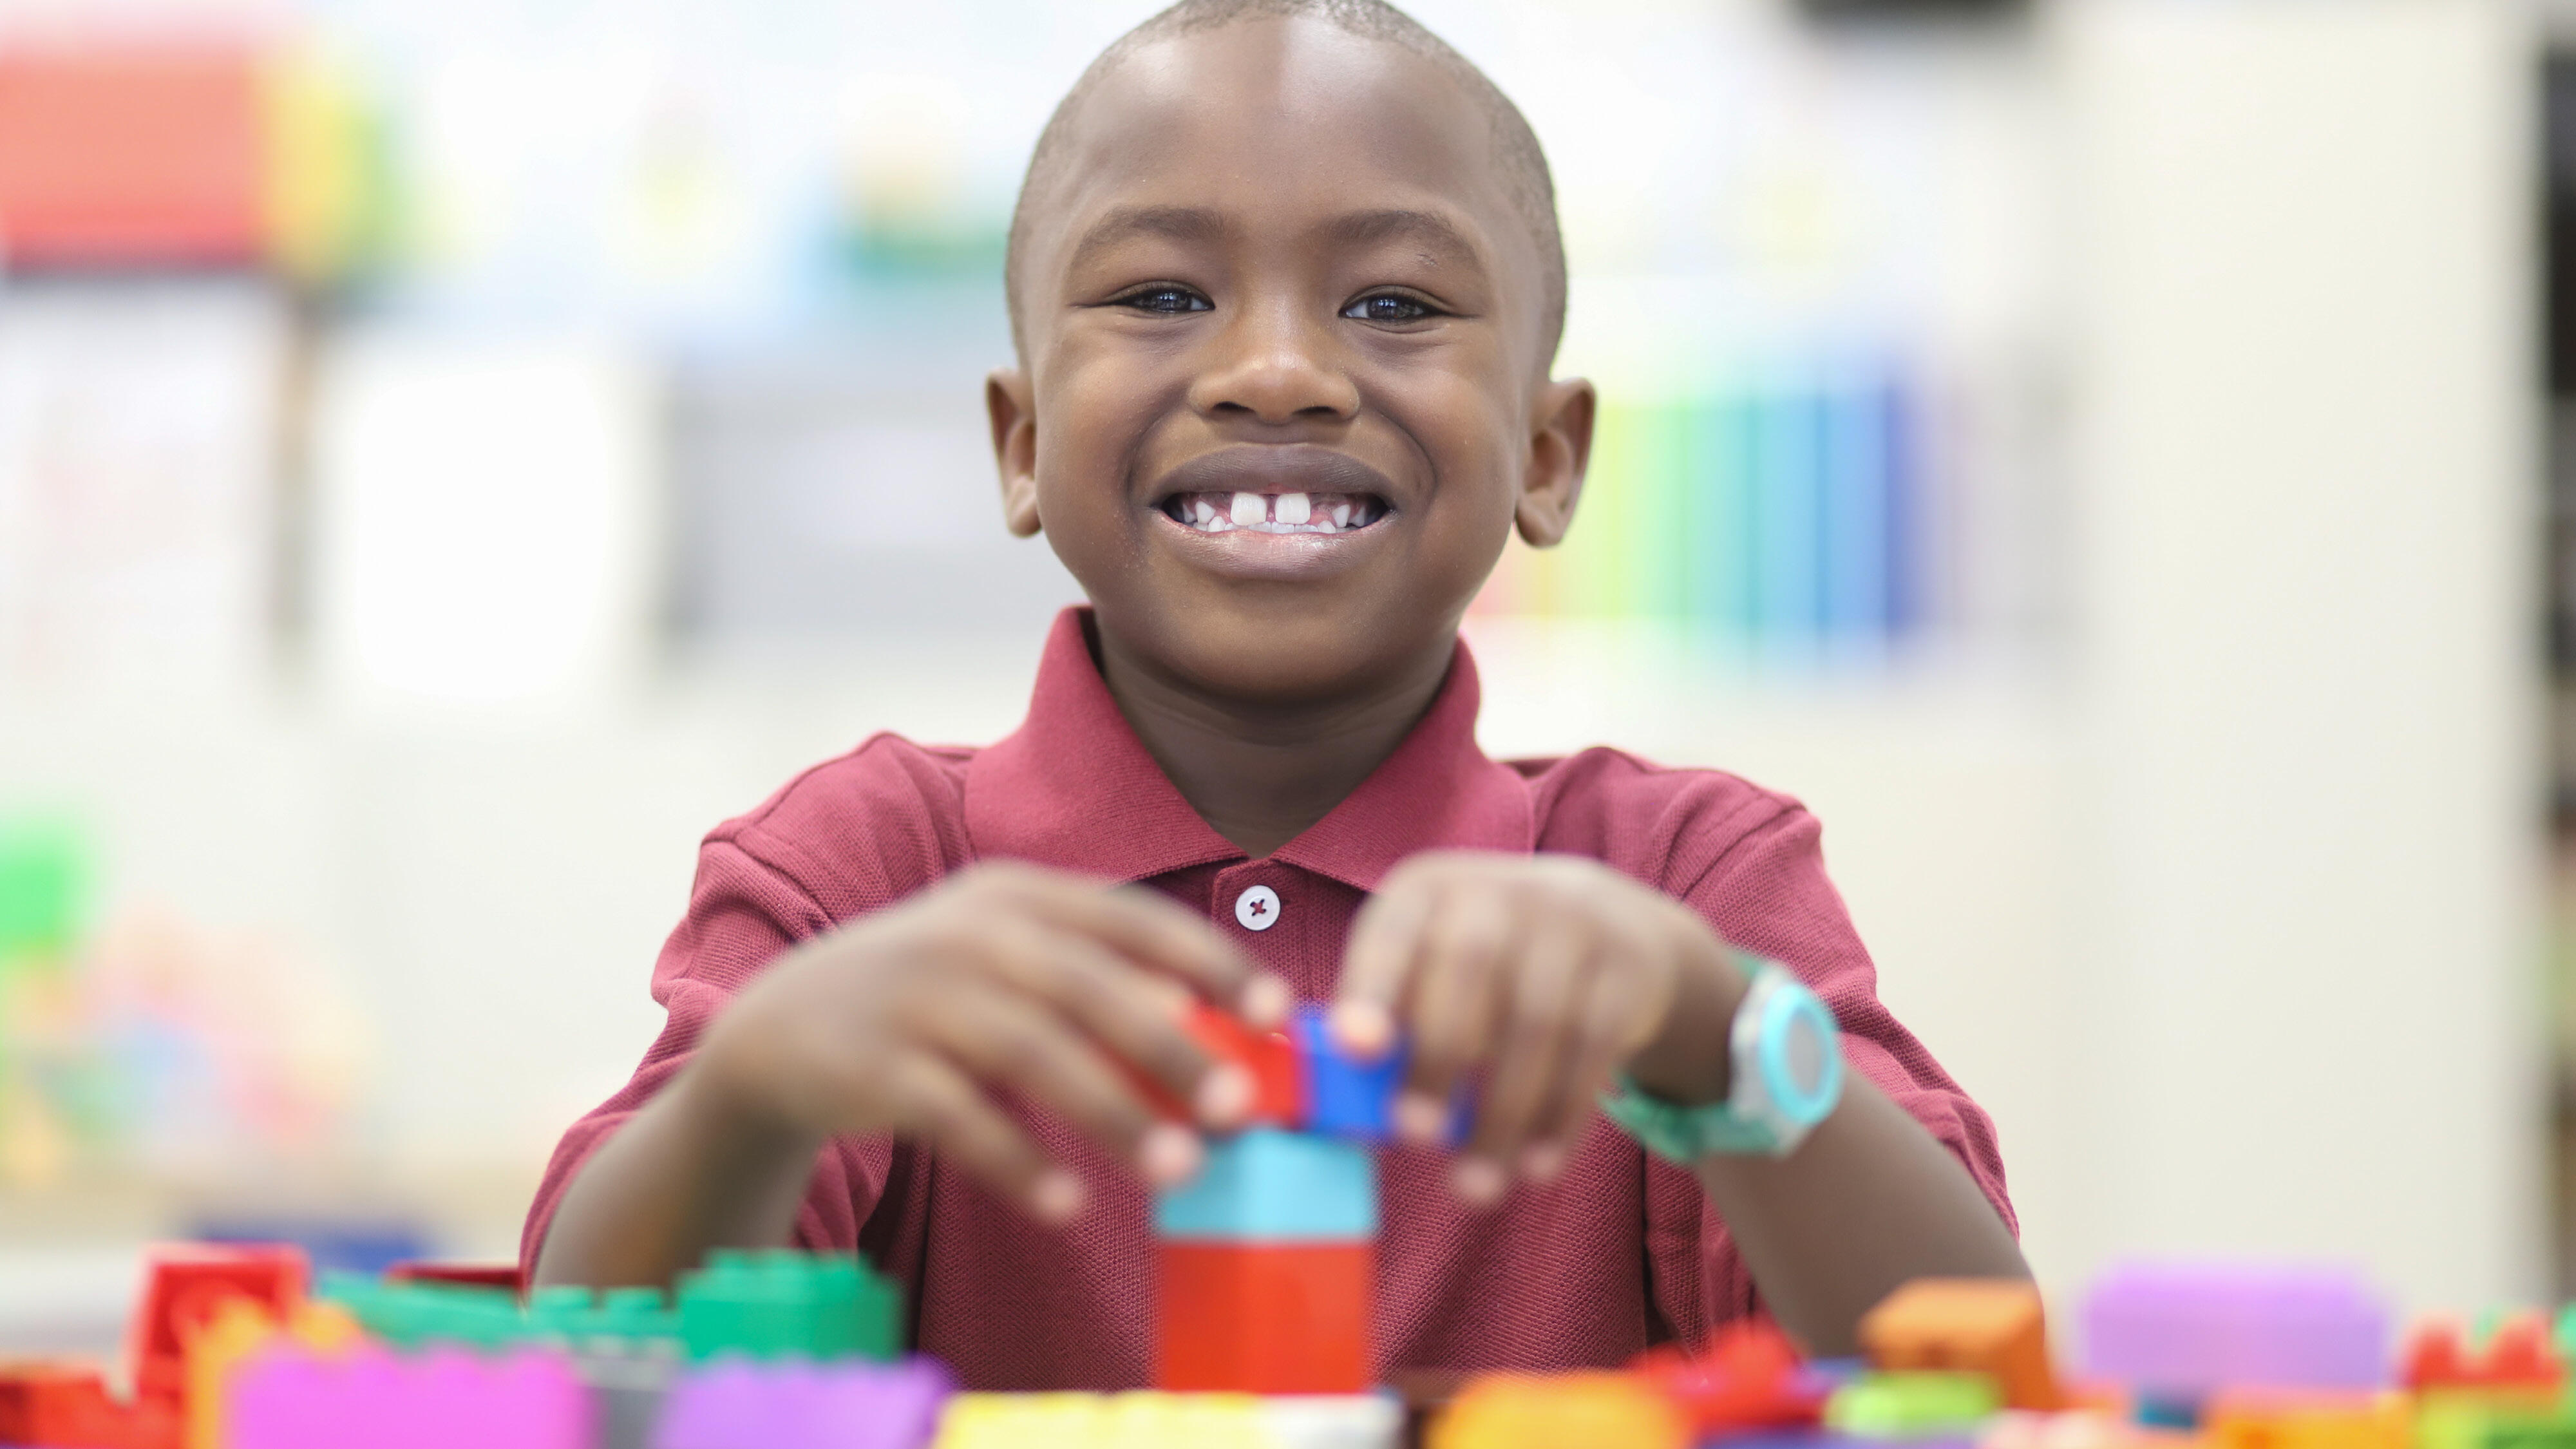 Student smiling and building with blocks